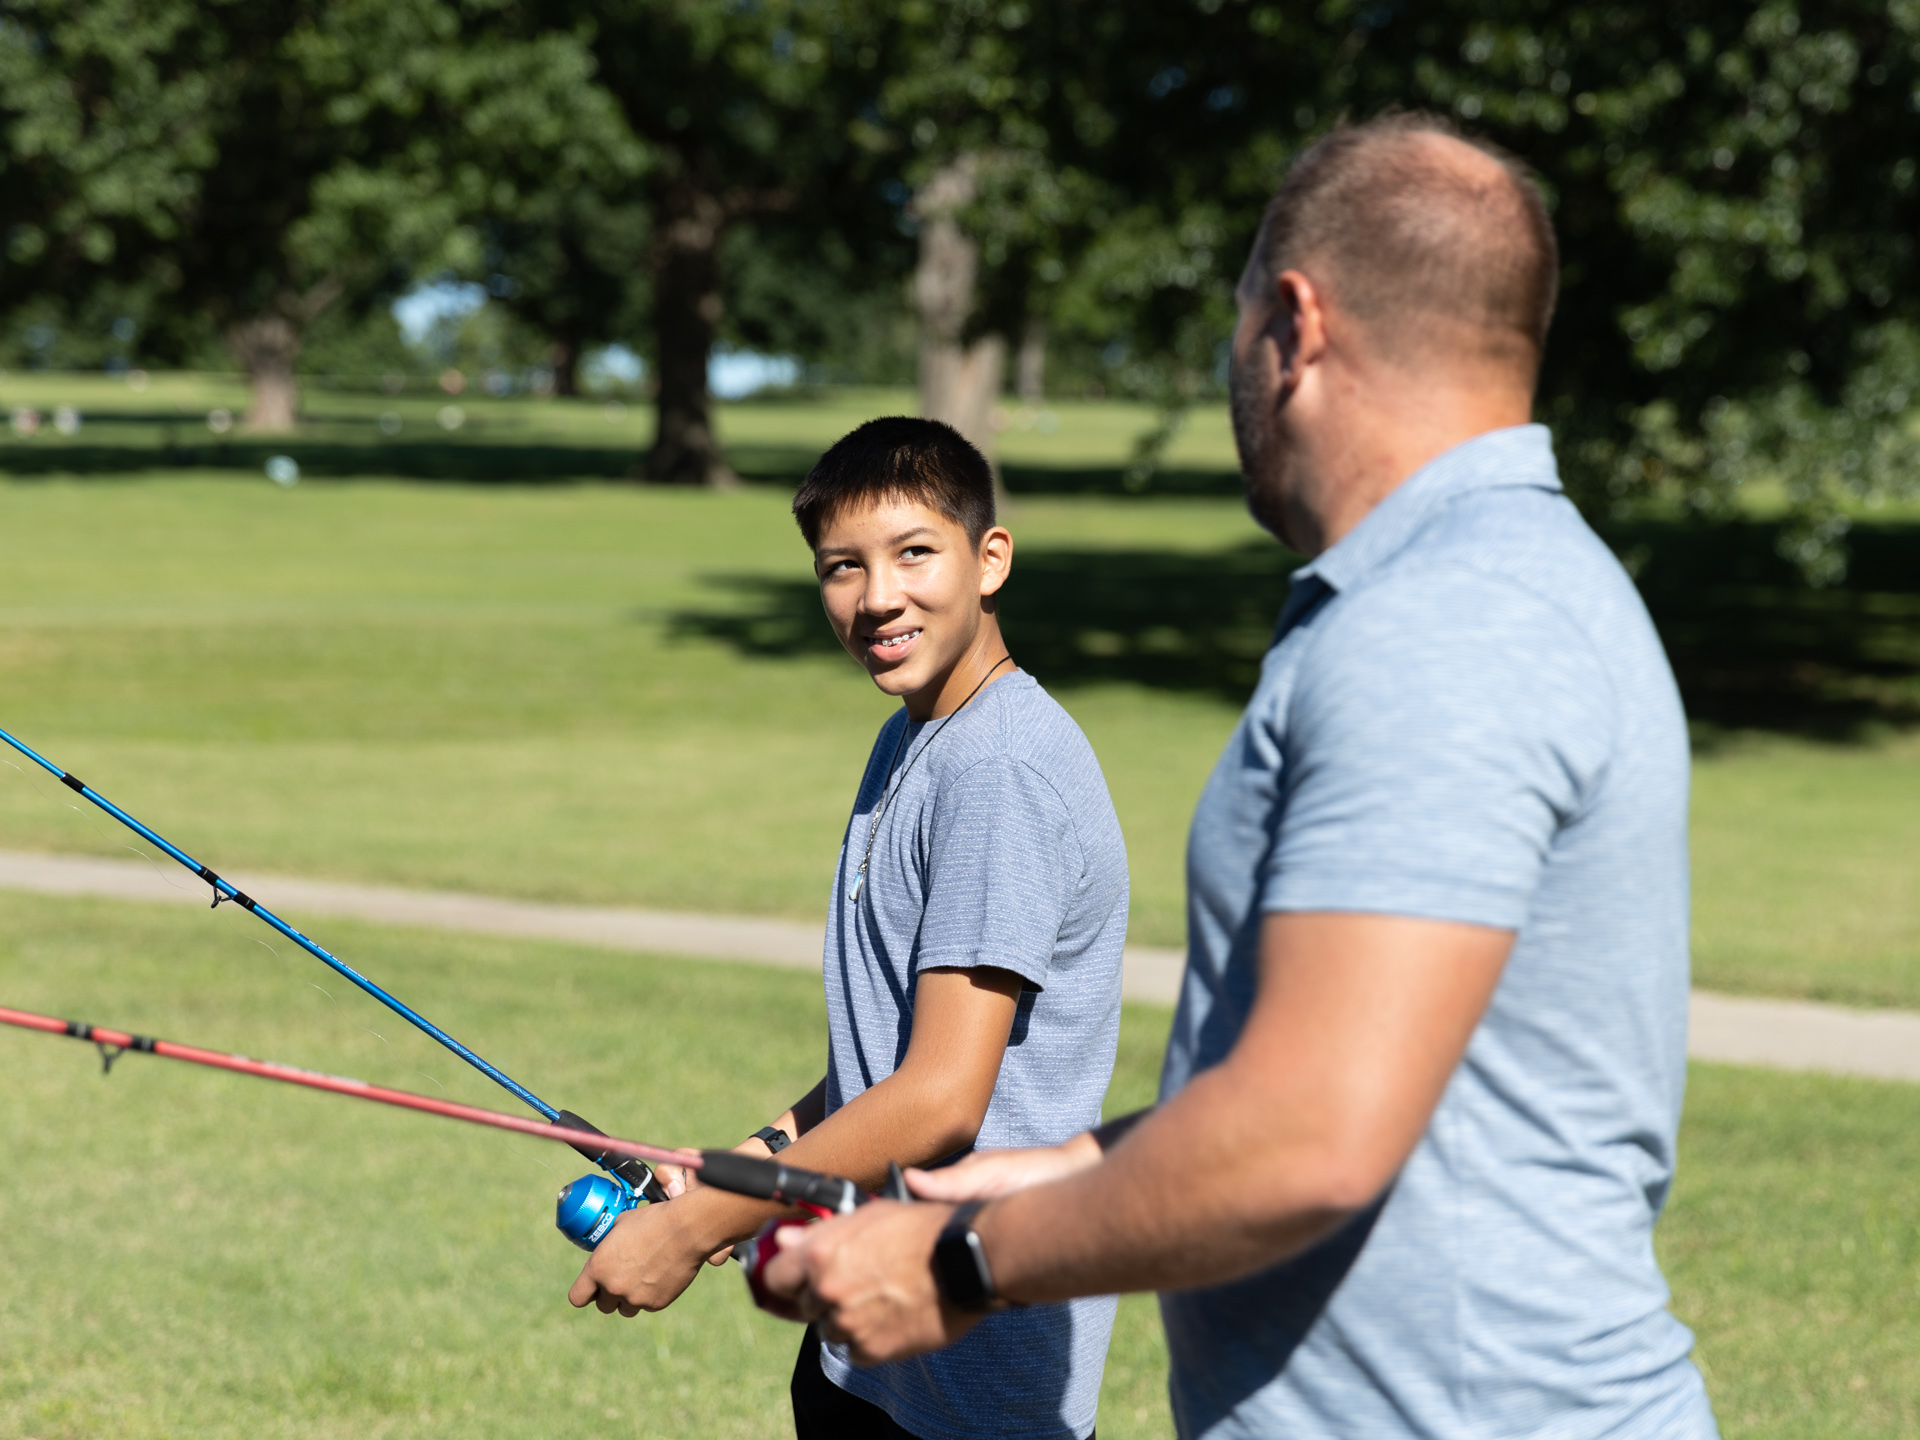 A man in a polo shirt stands along side a smiling boy as they reel in fishing rods at the park